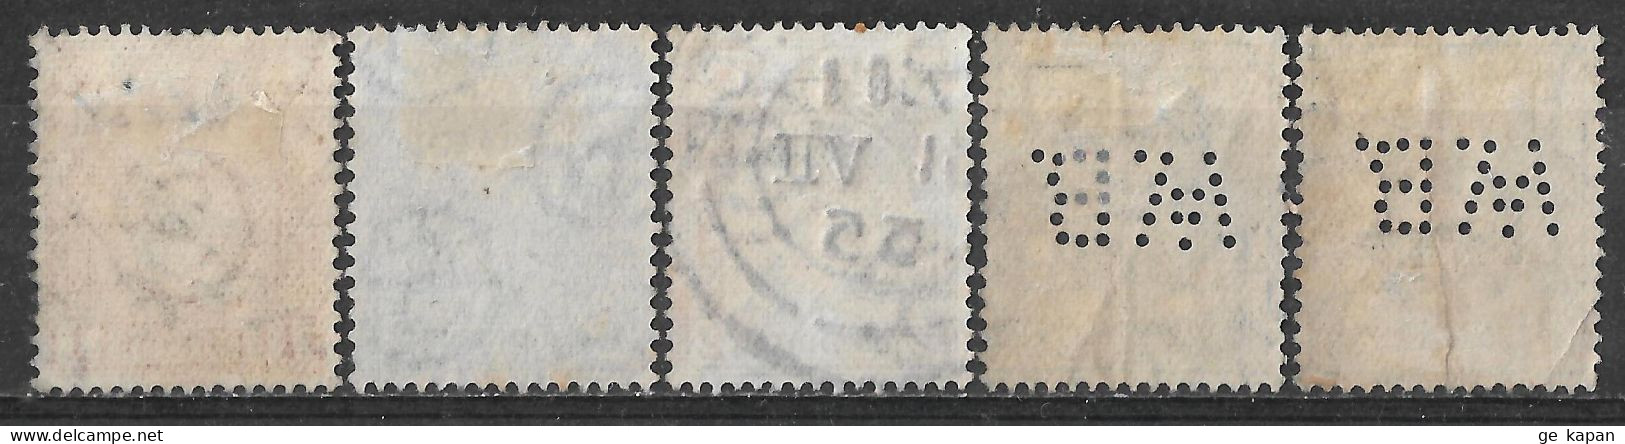 1922-1923 IRELAND SET OF 5 USED STAMPS (Michel # 41A,43A,45A) CV €5.30 - Used Stamps